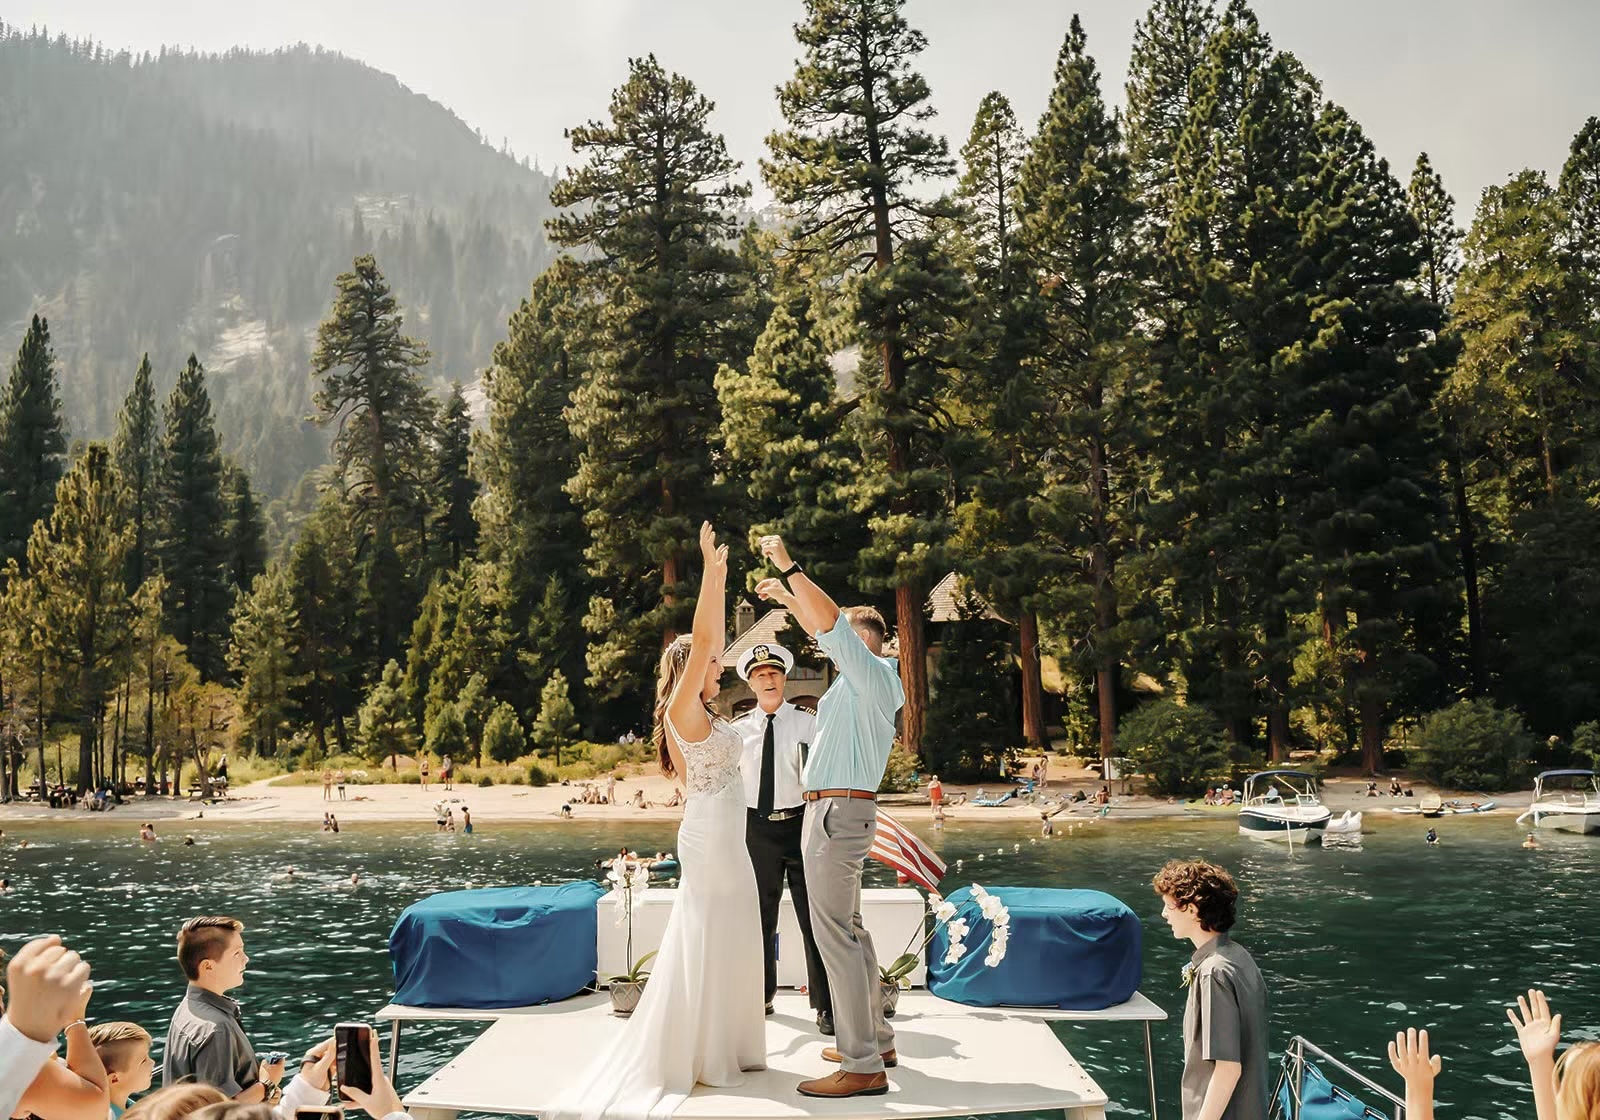 Bride and groom say their vows at the Lake Tahoe boat wedding